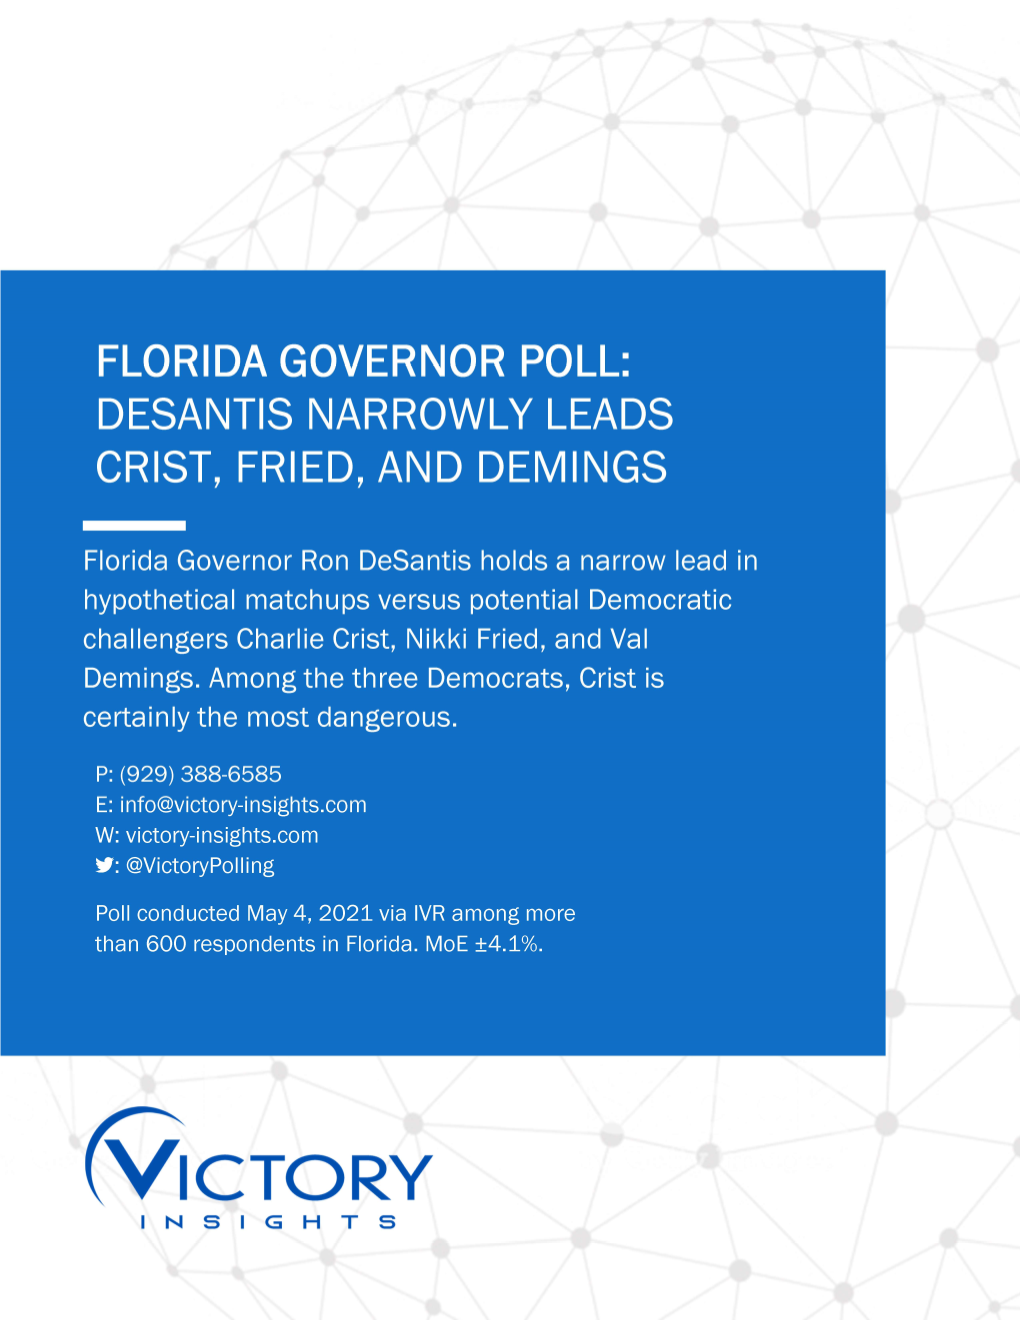 Desantis Narrowly Leads Crist, Fried, and Demings